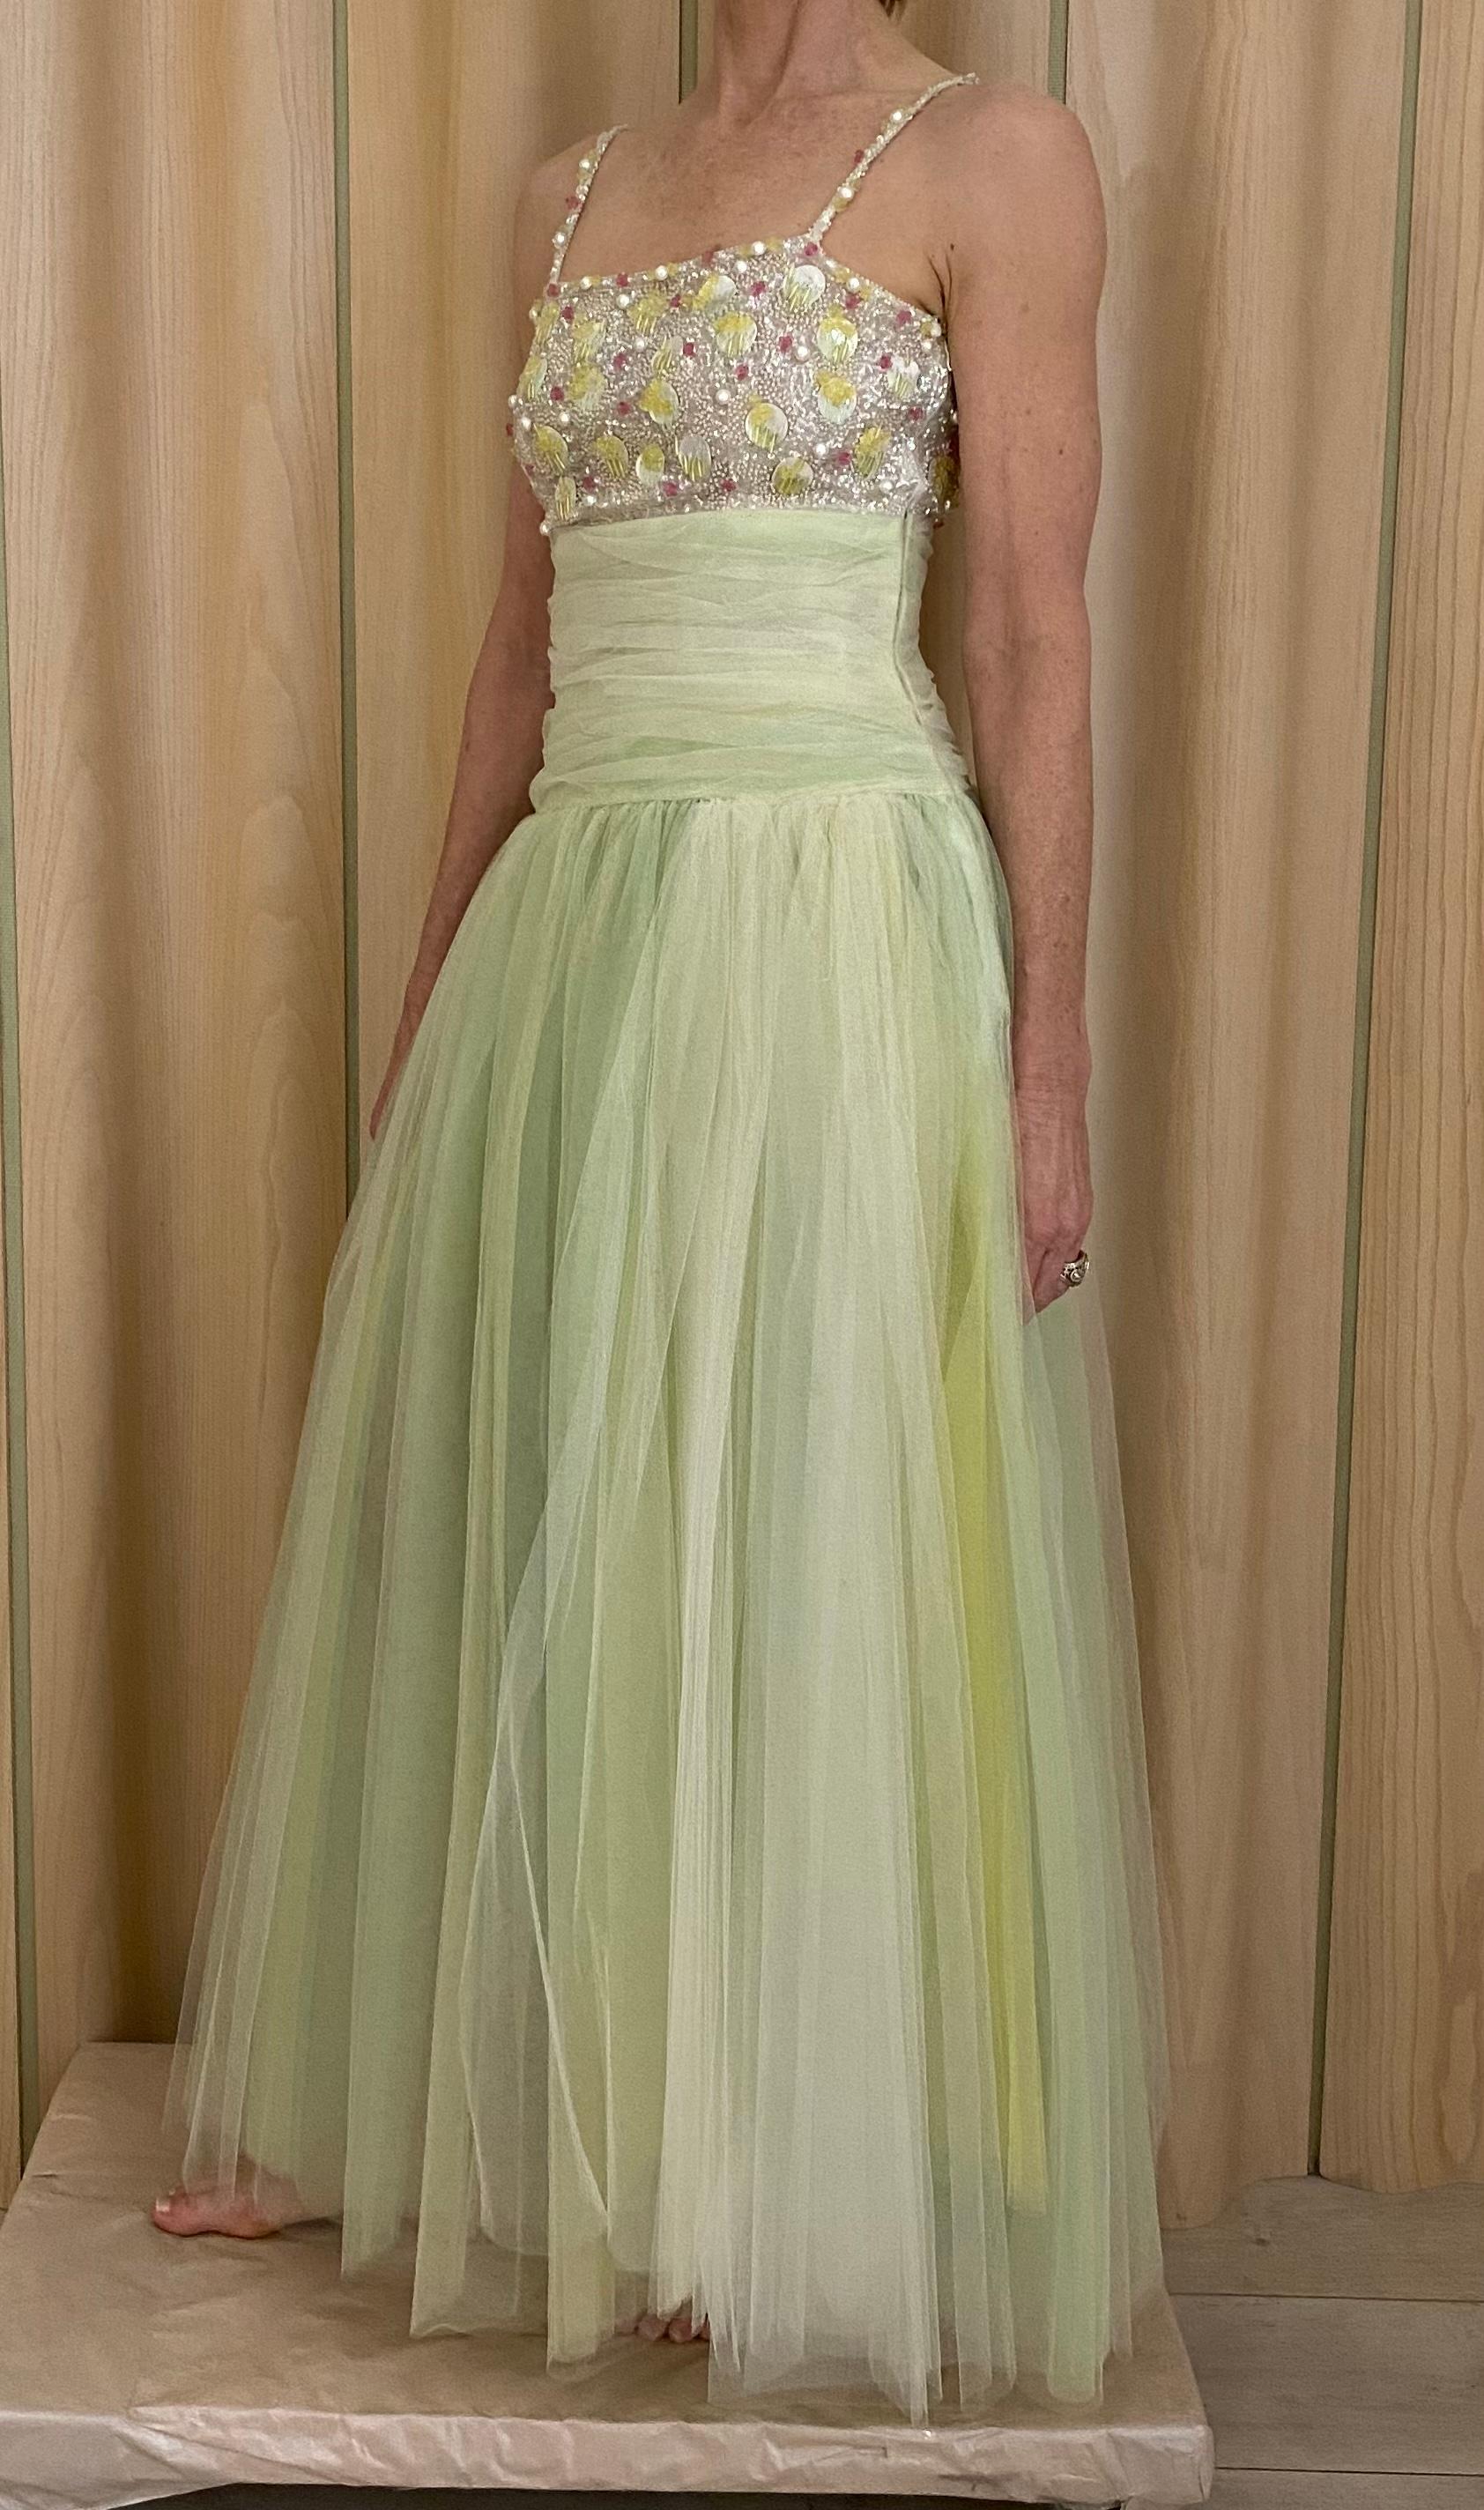 90s Chanel Light green yellow tulle spaghetti strap dress  embellished with pastel Pailletes ( see runway image) perfect dress for Met Gala or wedding. 
Fit size 4/6
Bust: 35”/ Waist 28”
